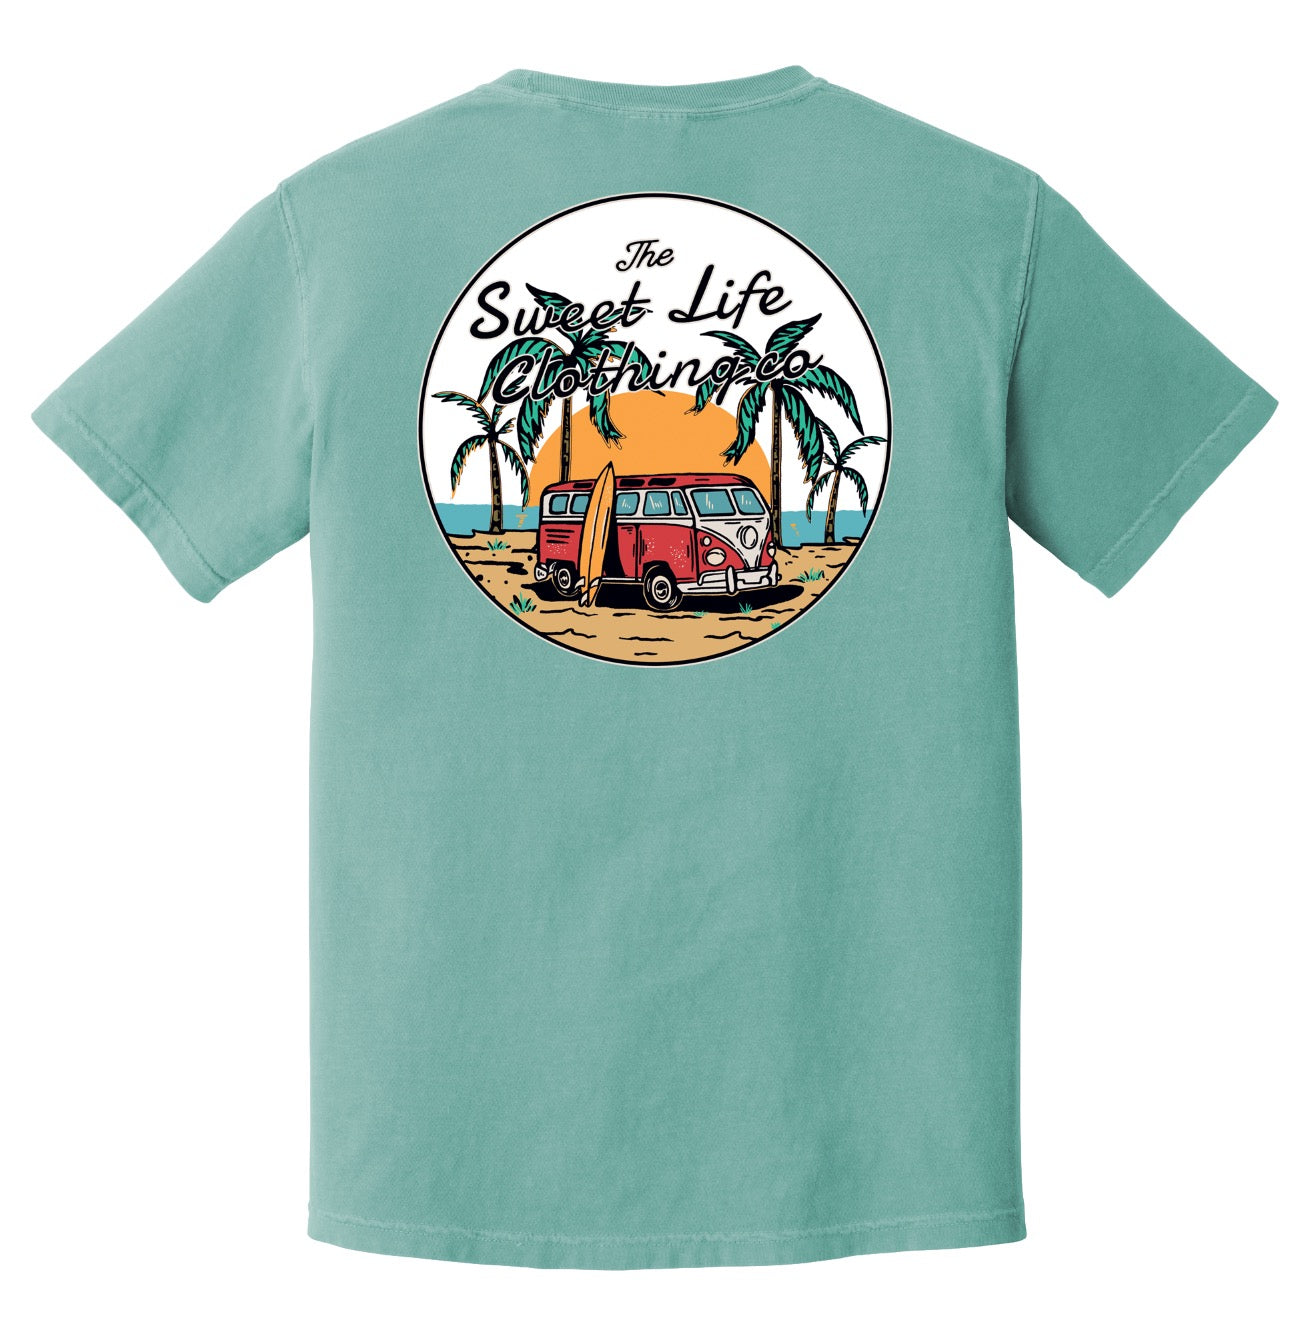 Bloom Tee – The Sweet Life Apparel and Gifts